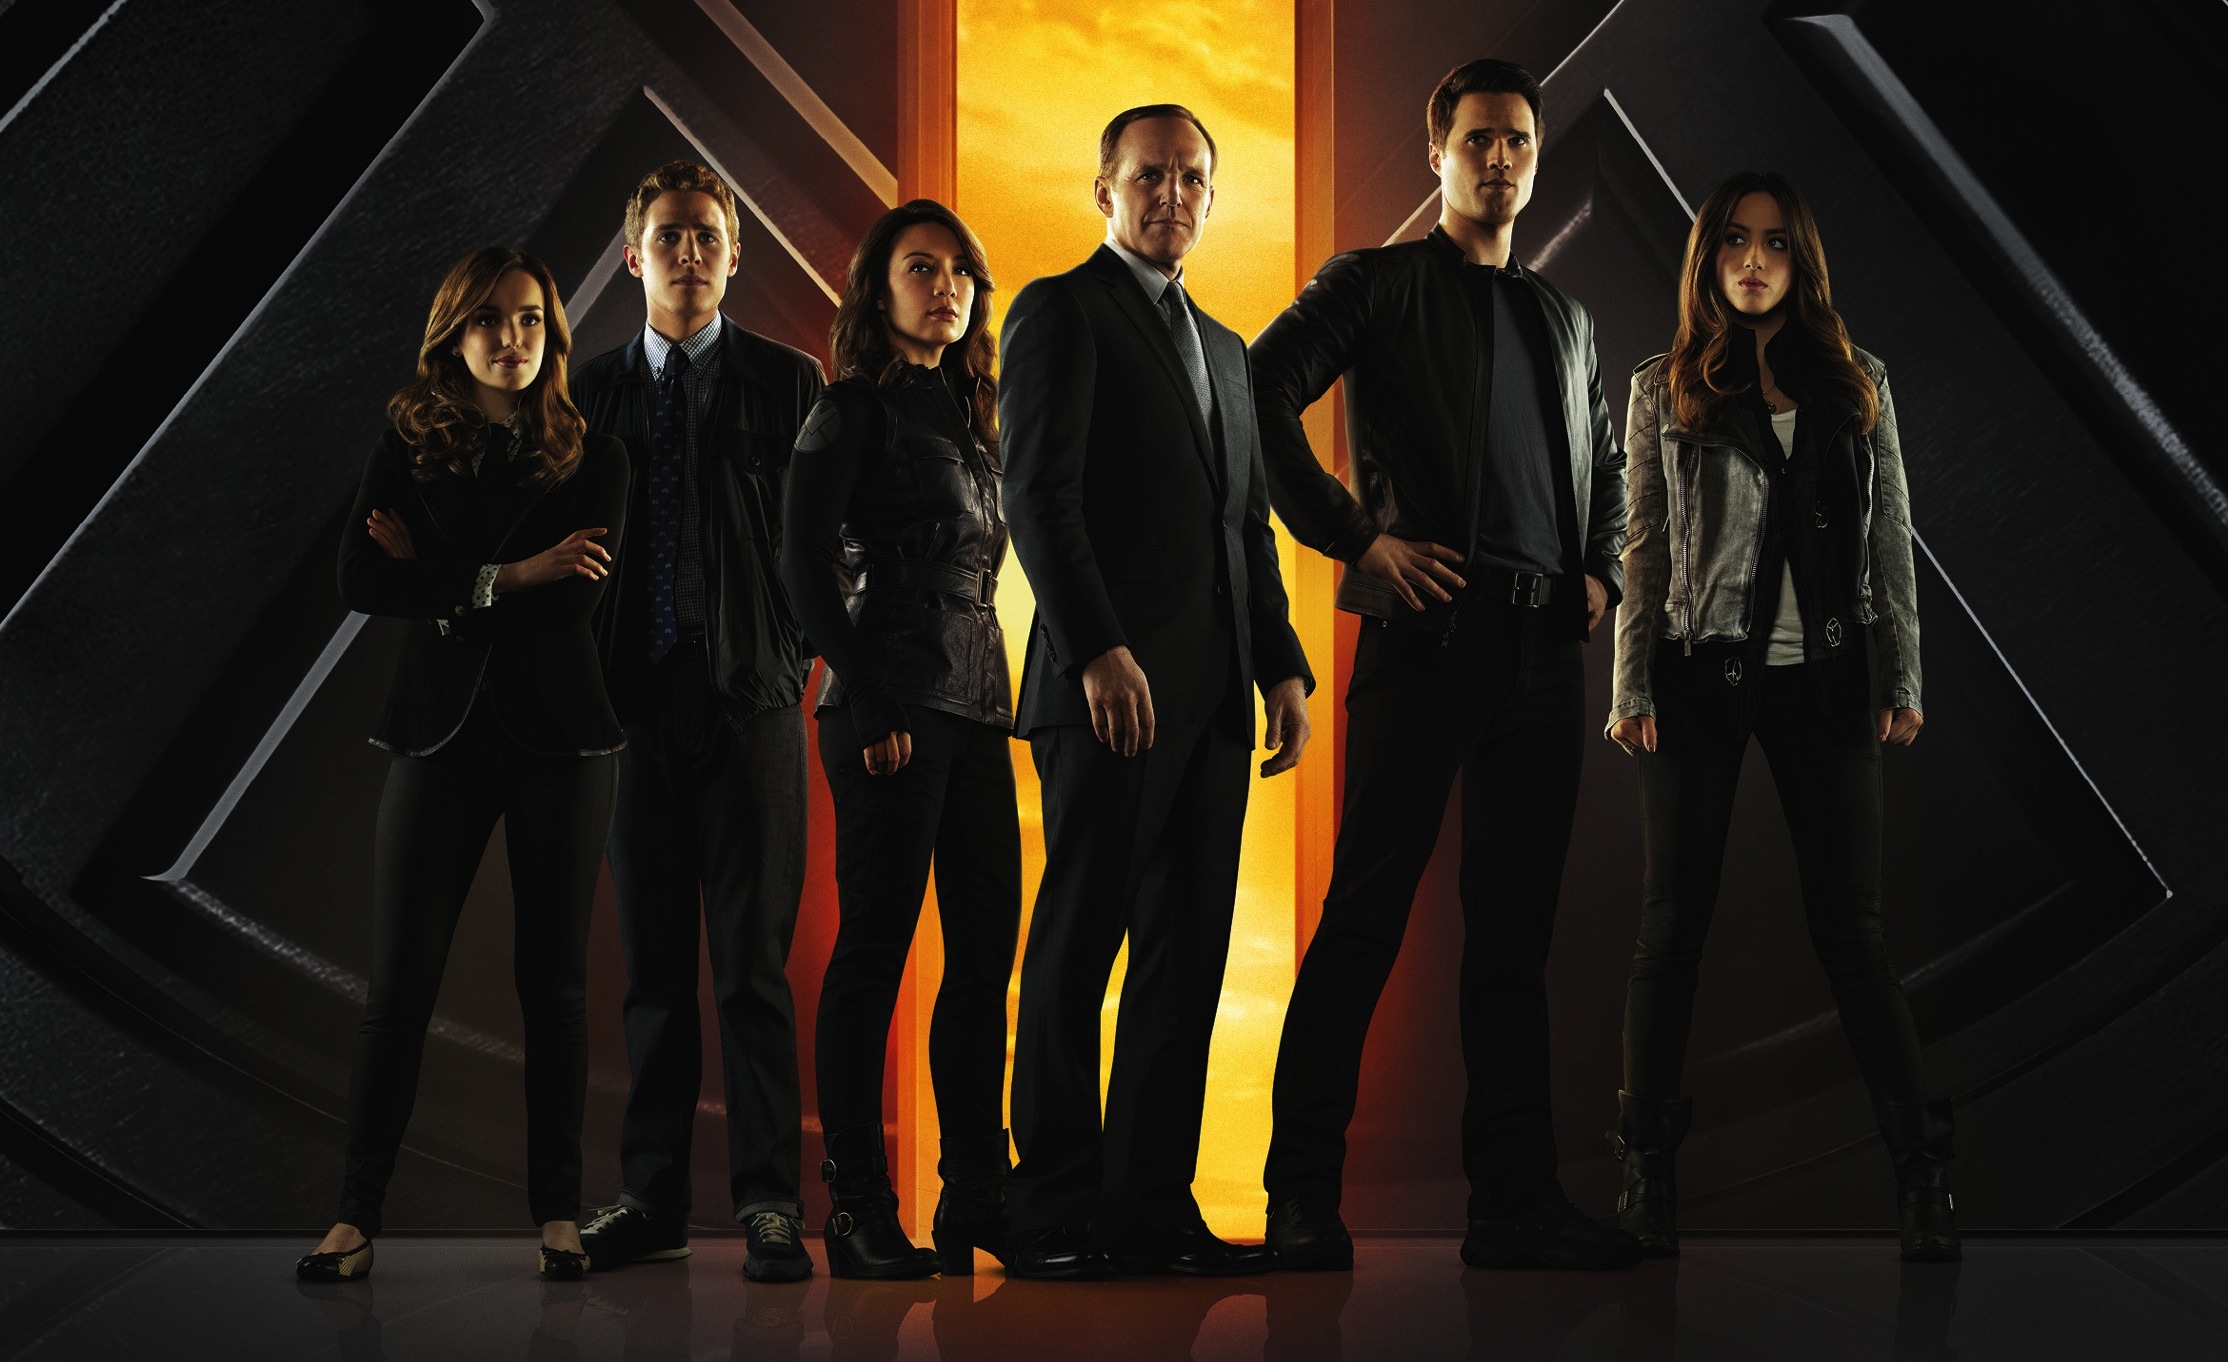 agents of shield season 1 all episodes free download